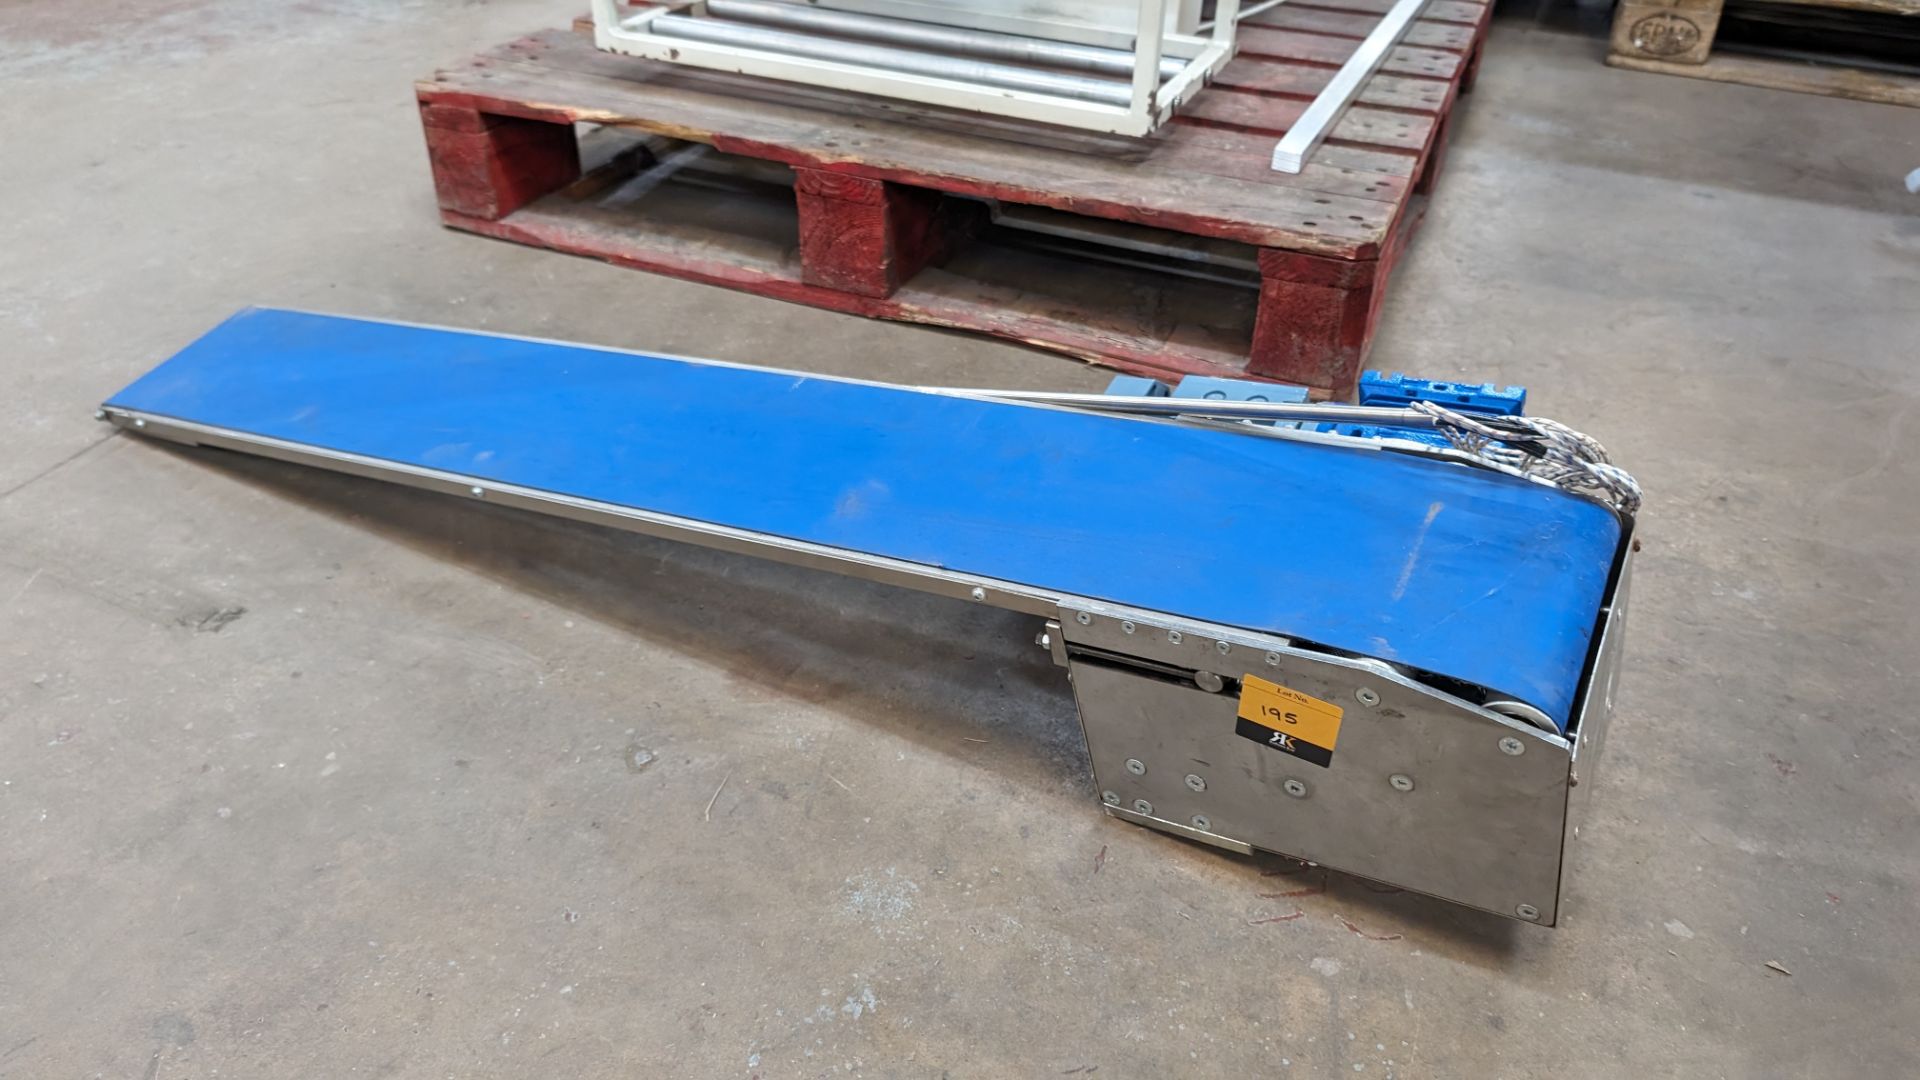 Motorised conveyor with belt approximately 150mm wide. Length of unit approximately 1140mm